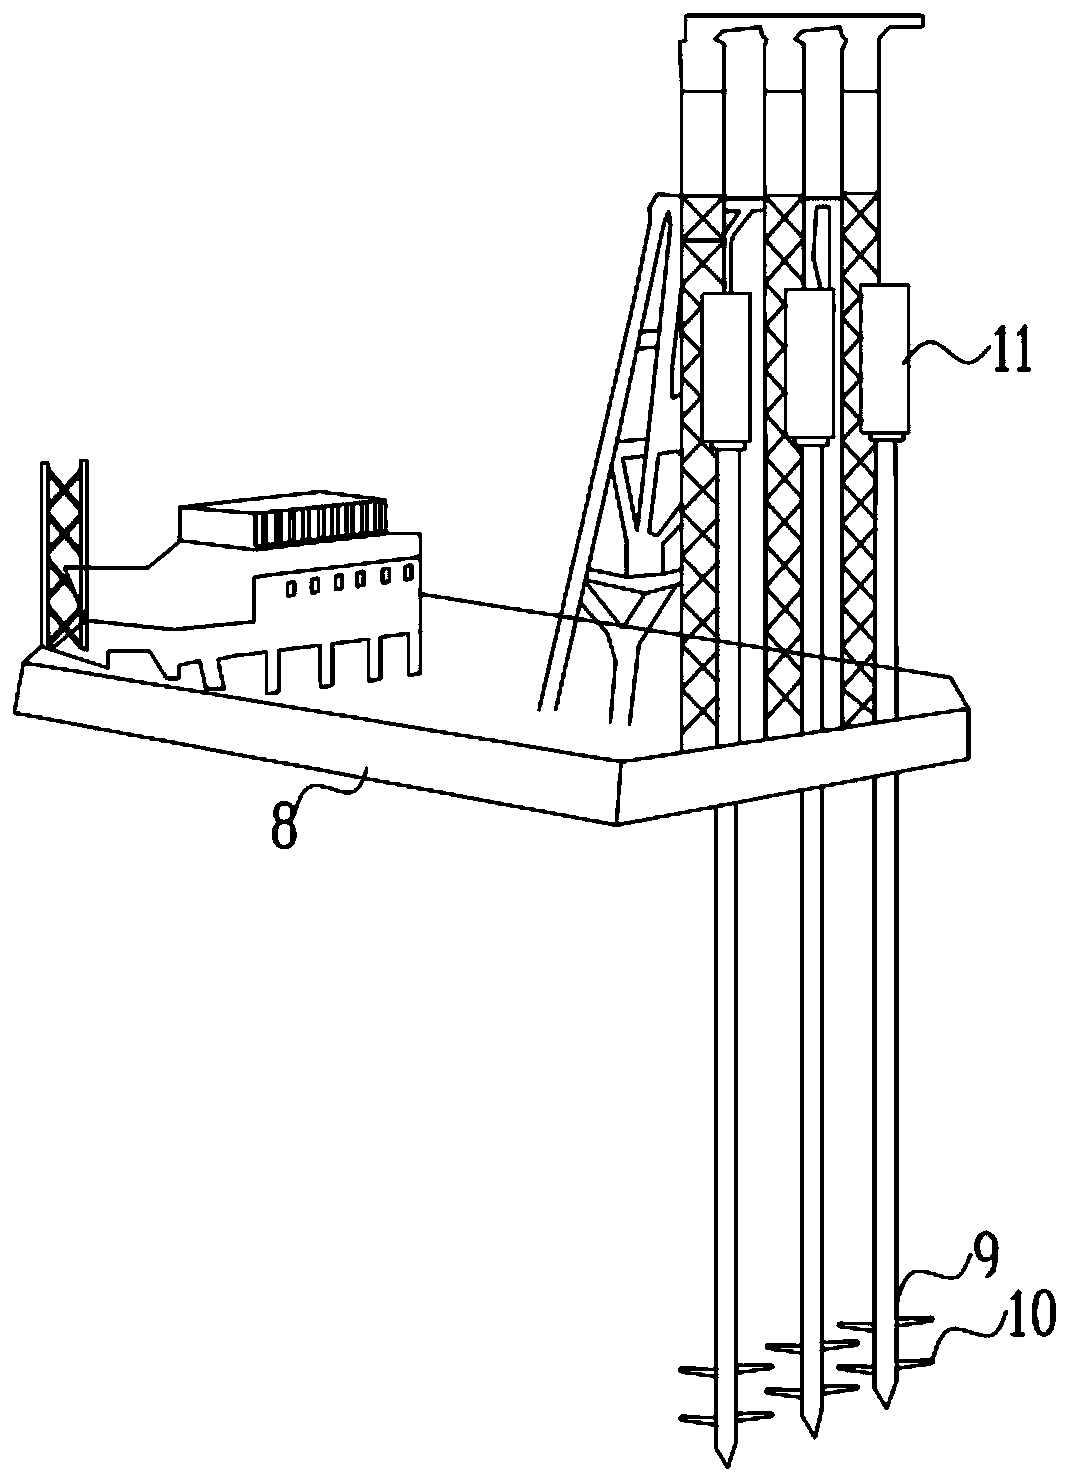 Composite foundation-bucket offshore wind power foundation with piles distributed in bucket and construction method